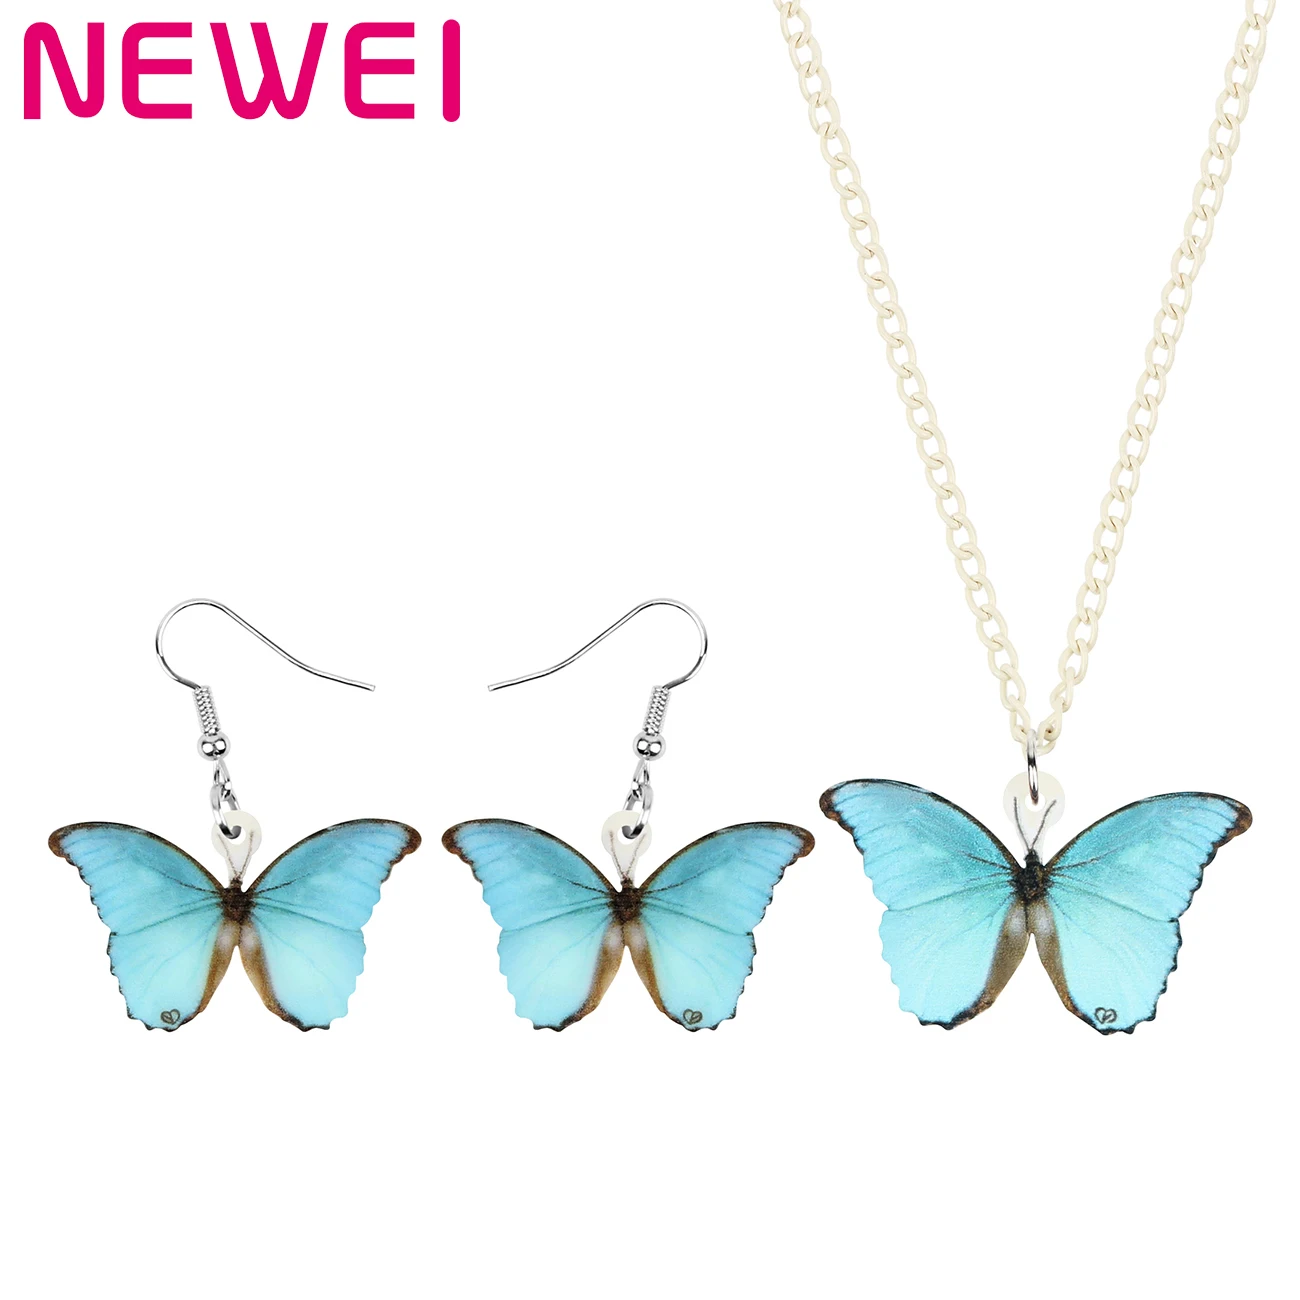 

Newei Acrylic Blue Morpho Butterfly Jewelry Sets Cute Animal Insect Necklace Earrings For Women Girls Kid Fashion Gift Jewellery